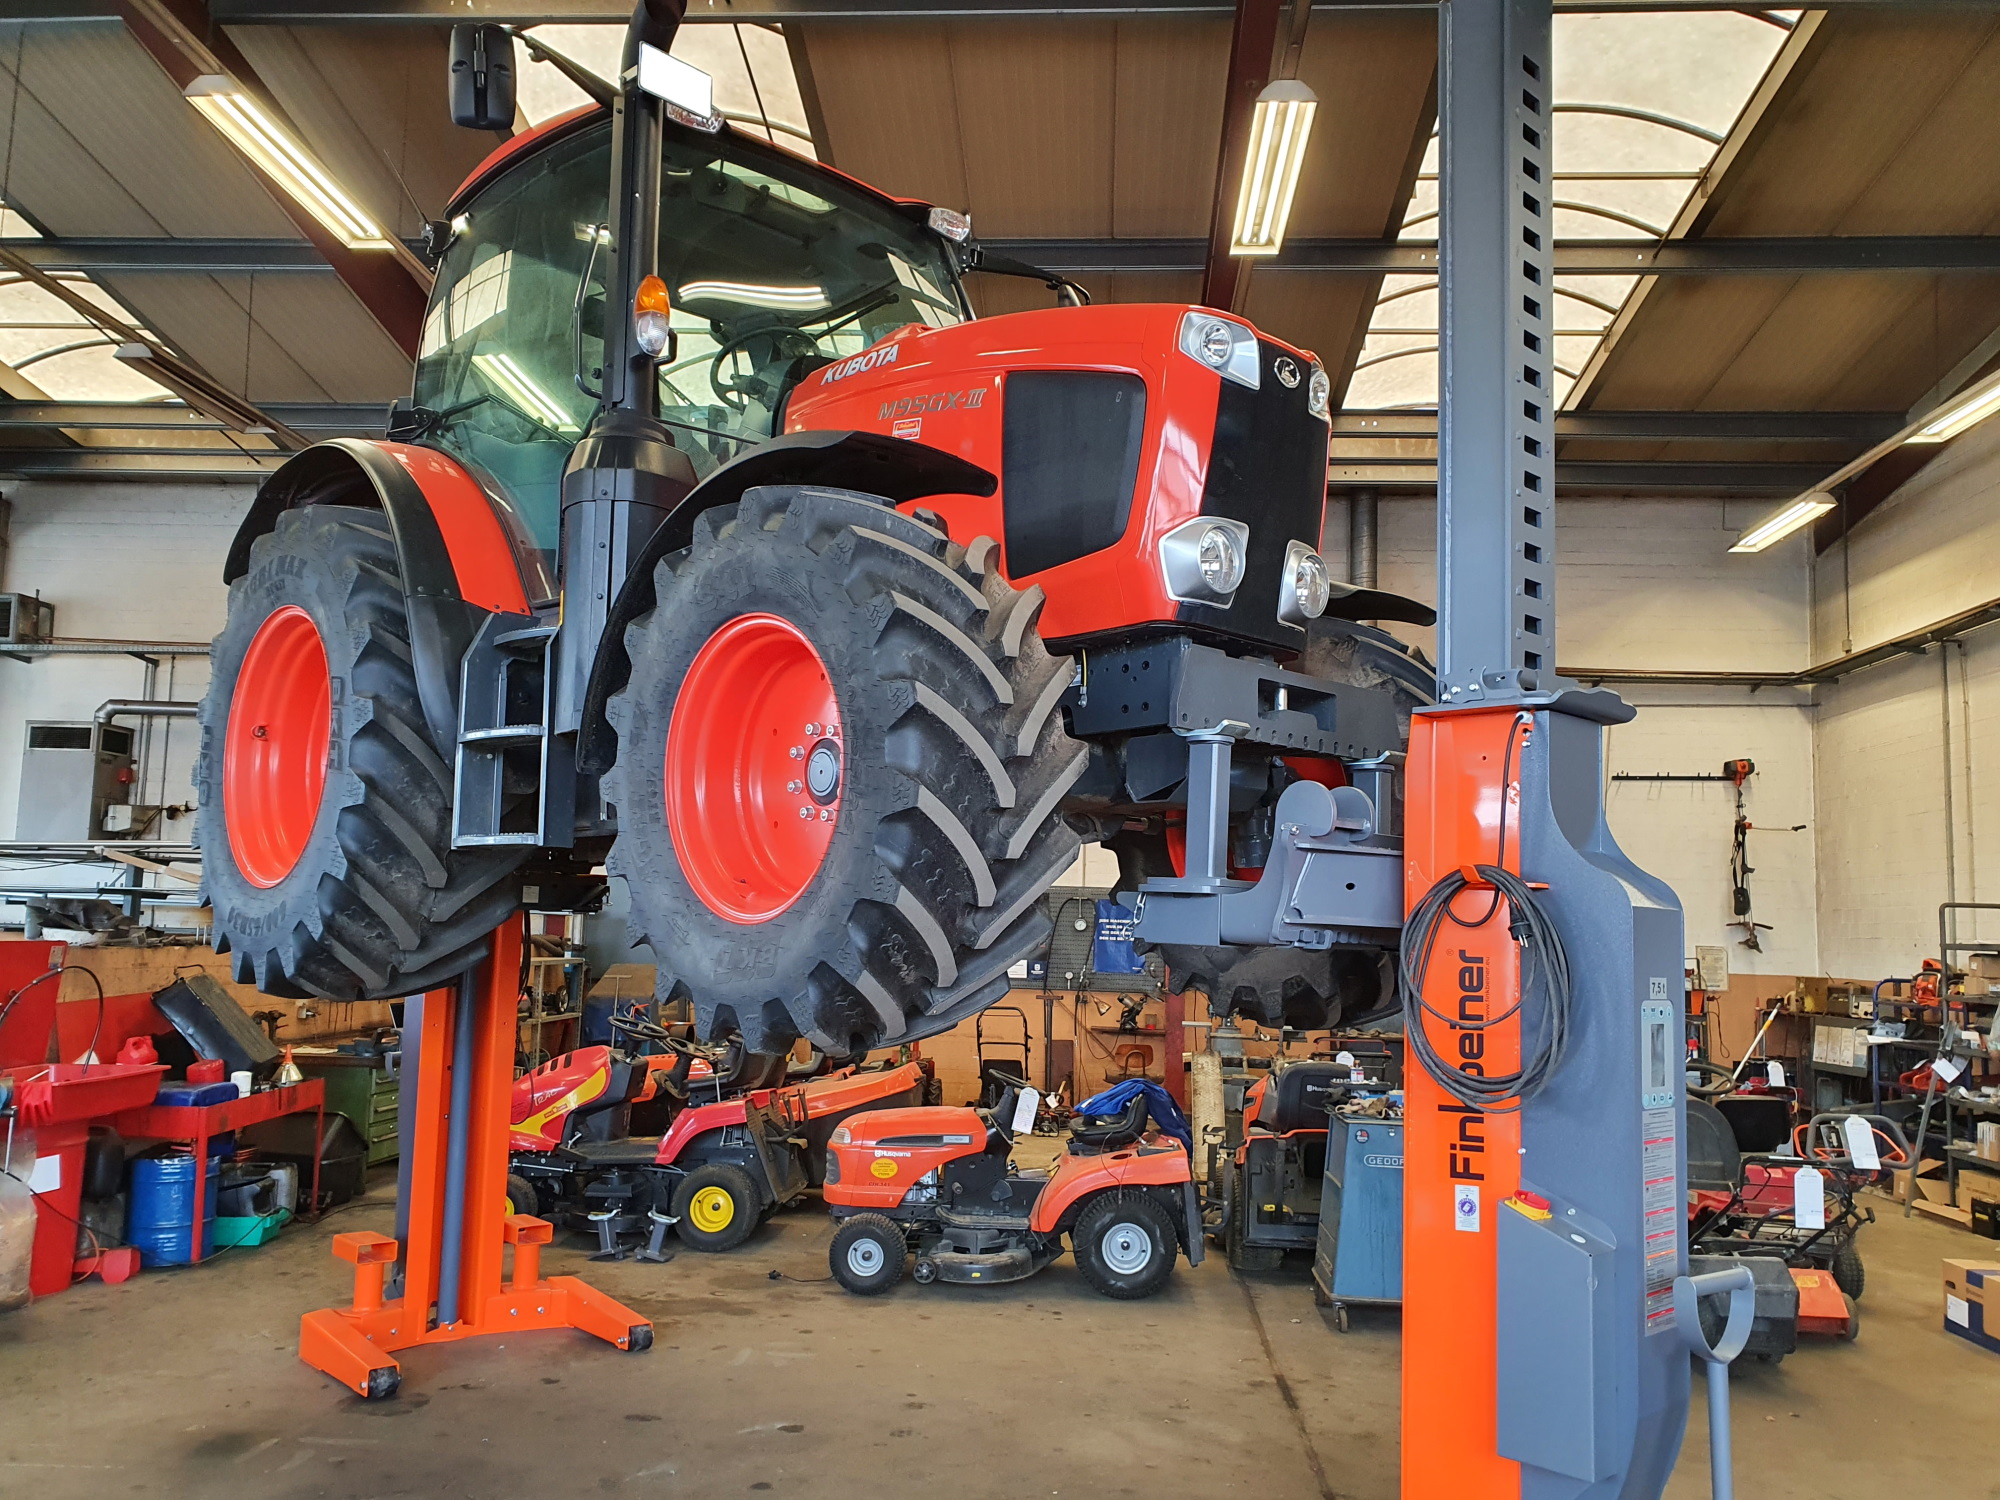 A Kubota tractor is lifted at front and at back with two mobile columns.